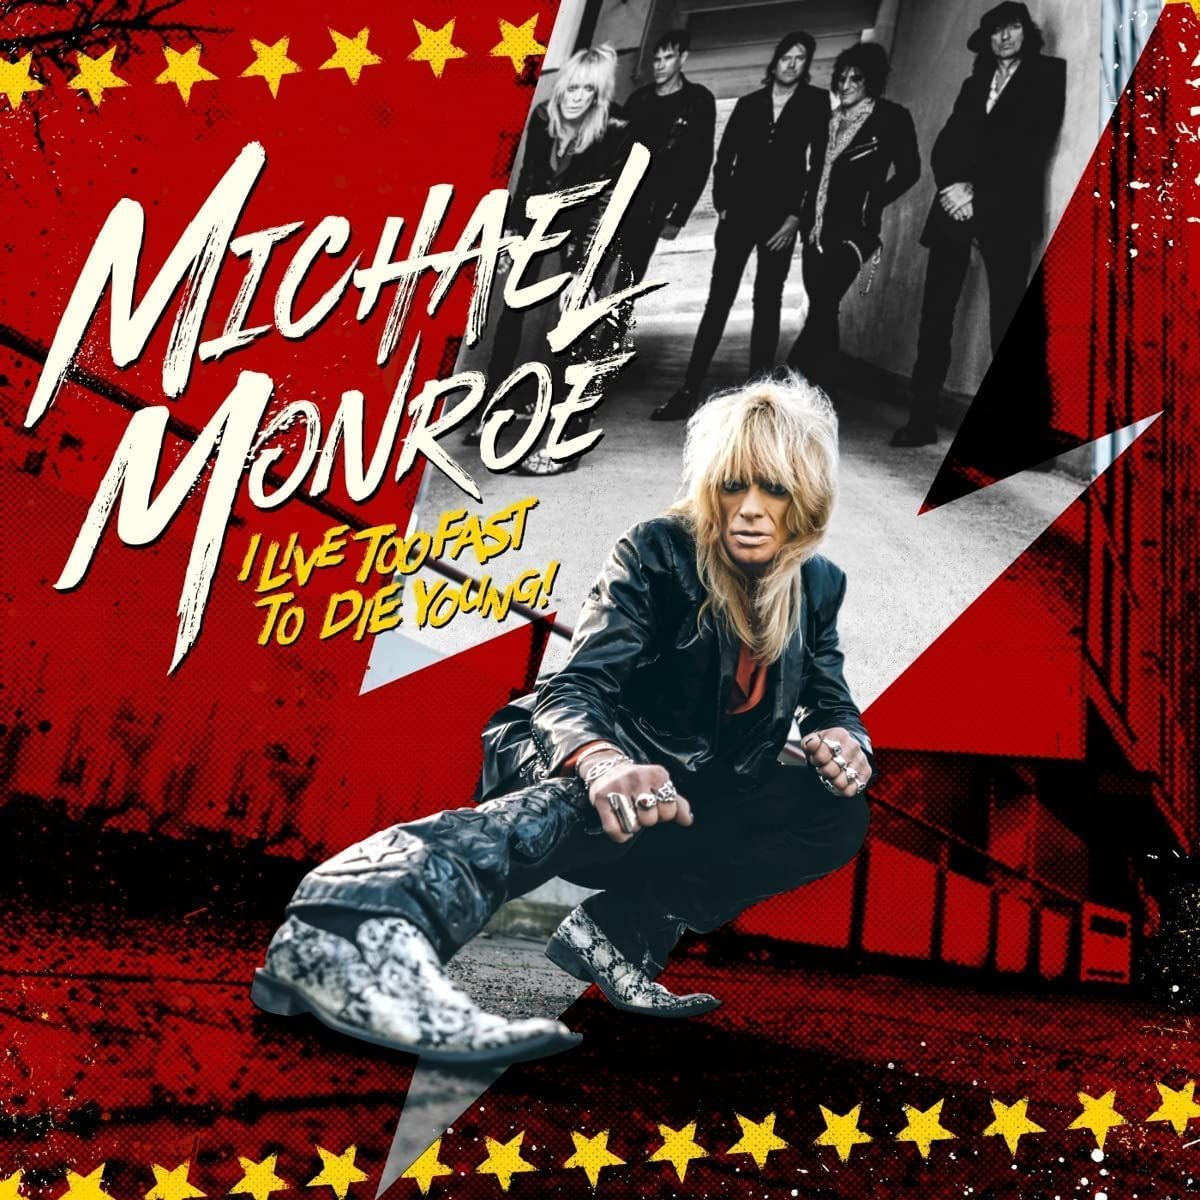 Monroe, Michael - I Live Too Fast To Die Young! - CD - New